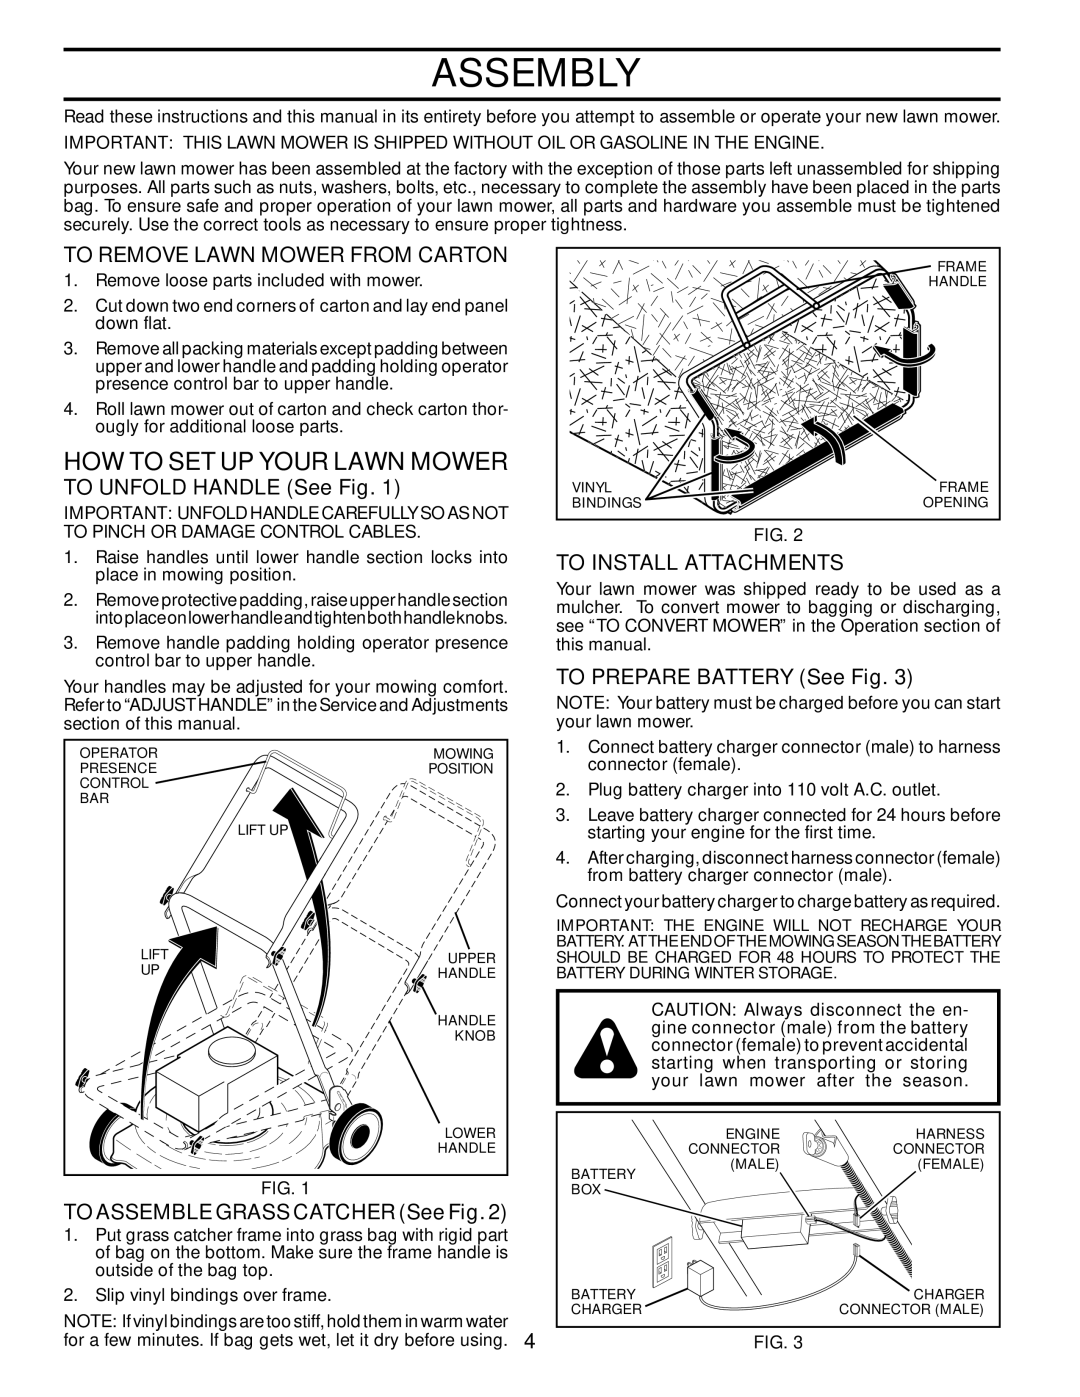 Husqvarna 96143004400 Assembly, To Remove Lawn Mower From Carton, TO UNFOLD HANDLE See Fig, To Install Attachments 